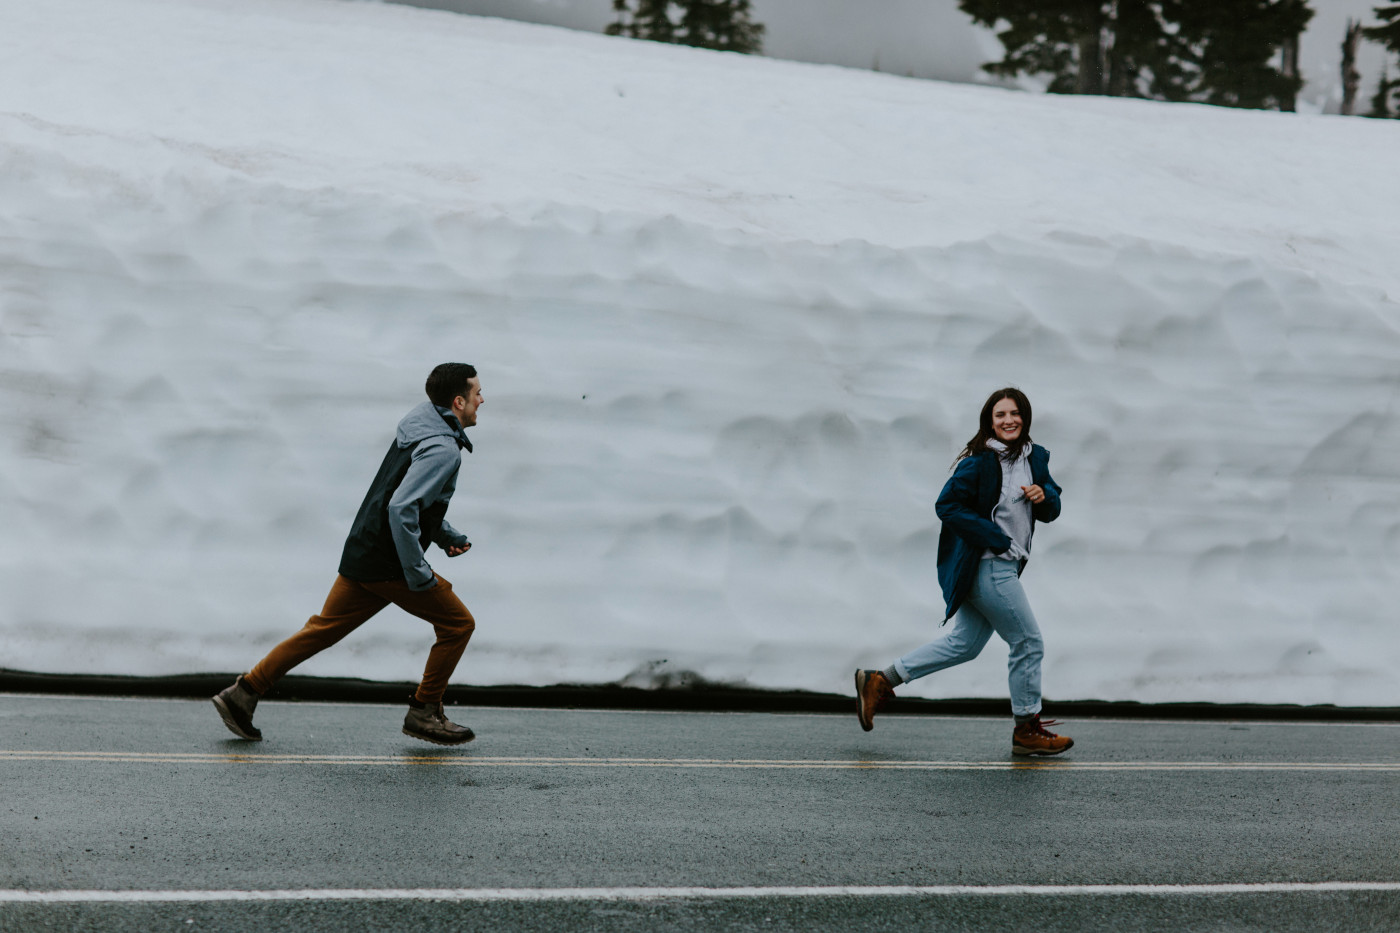 Taylor and Kyle play a game of tag on the road. Elopement photography at North Cascades National Park by Sienna Plus Josh.